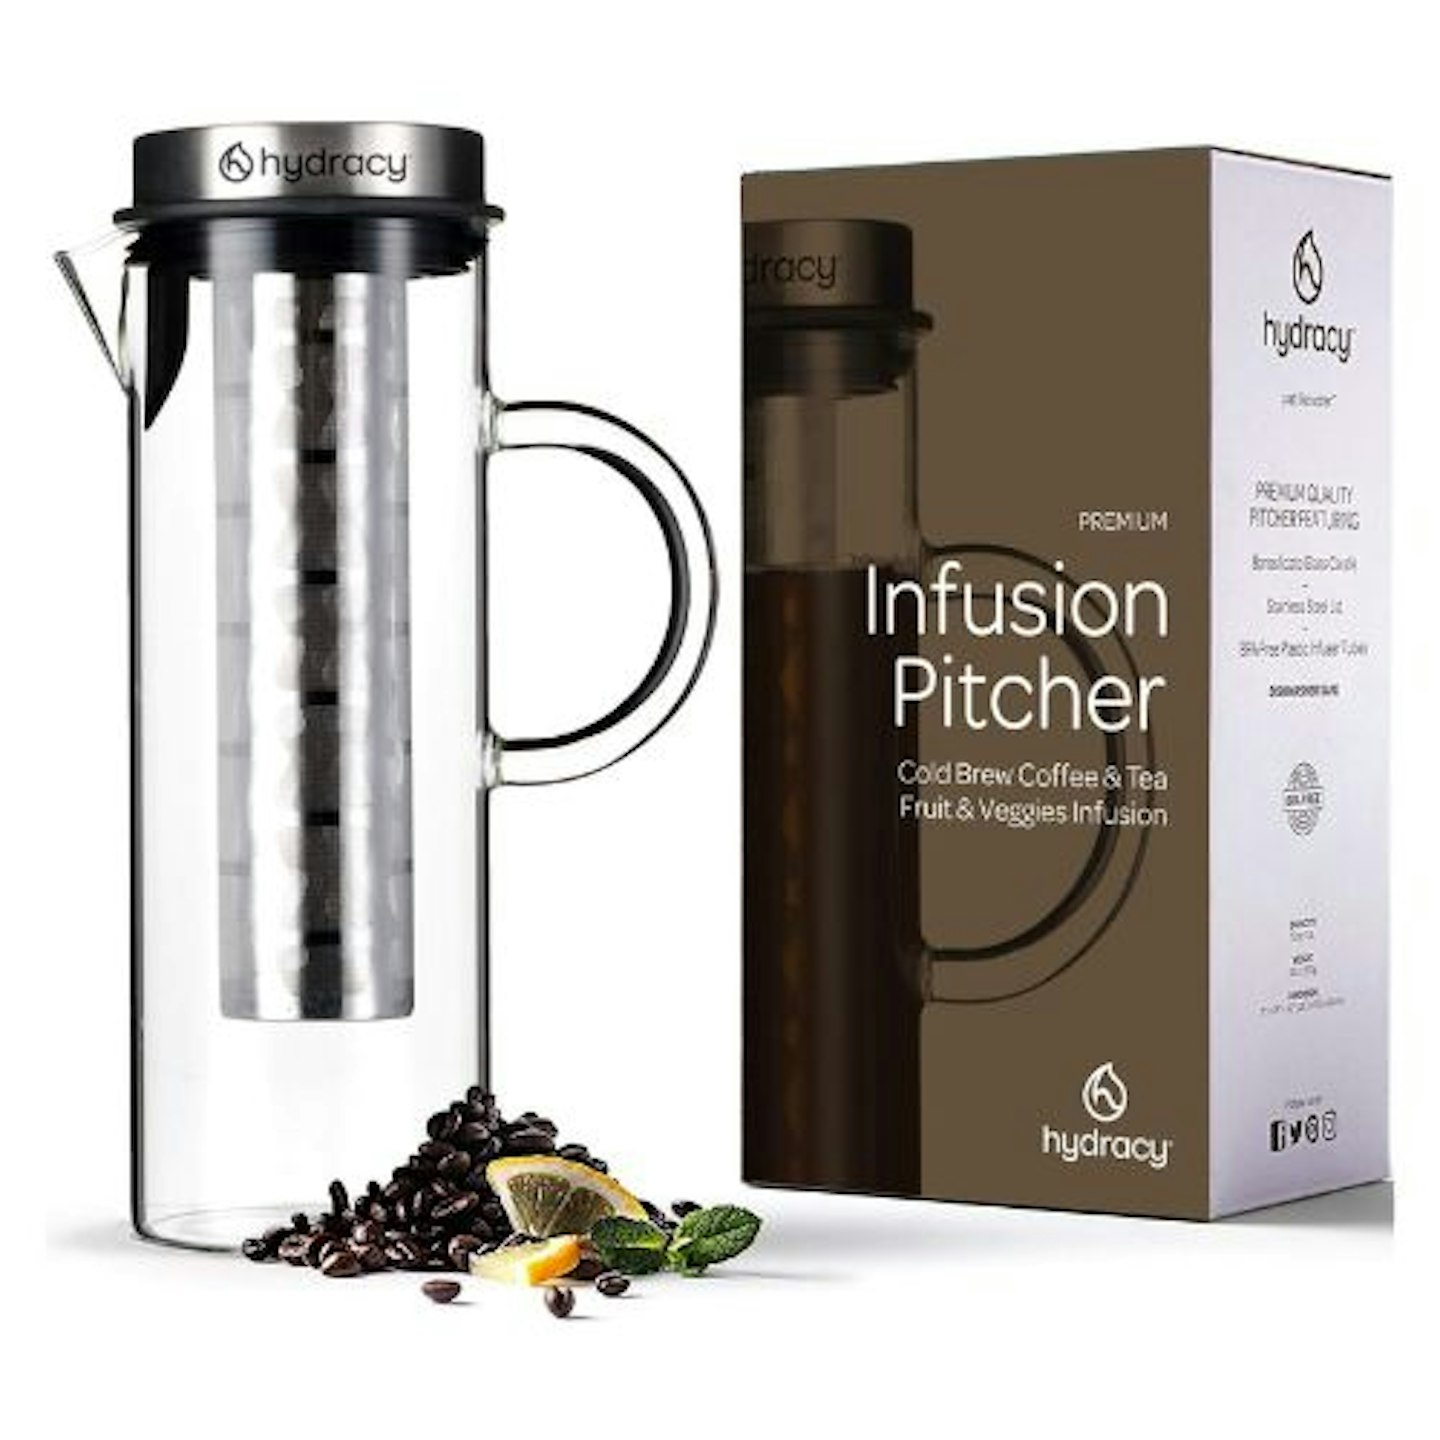 Cold Brew Coffee Maker - Large Glass Infusion Pitcher 1500ml - Iced Coffee & Iced Tea Pitcher with Stainless Steel Lid and Mesh Filter - Extra Fruit...